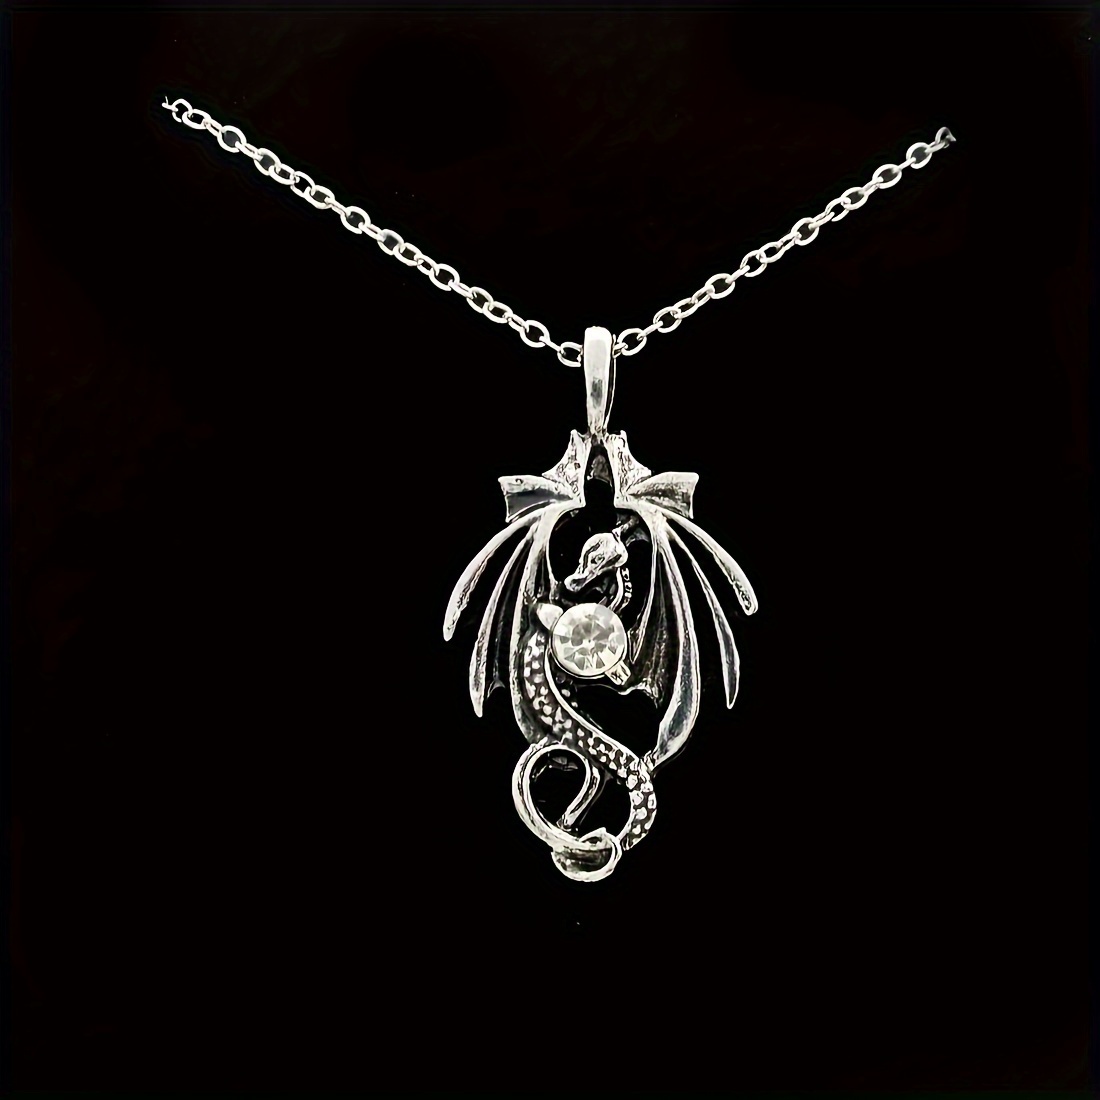 1pc cool engraved 3d dragon shaped pendant necklace rhinestone eternity love symbol clavicle chain for teens